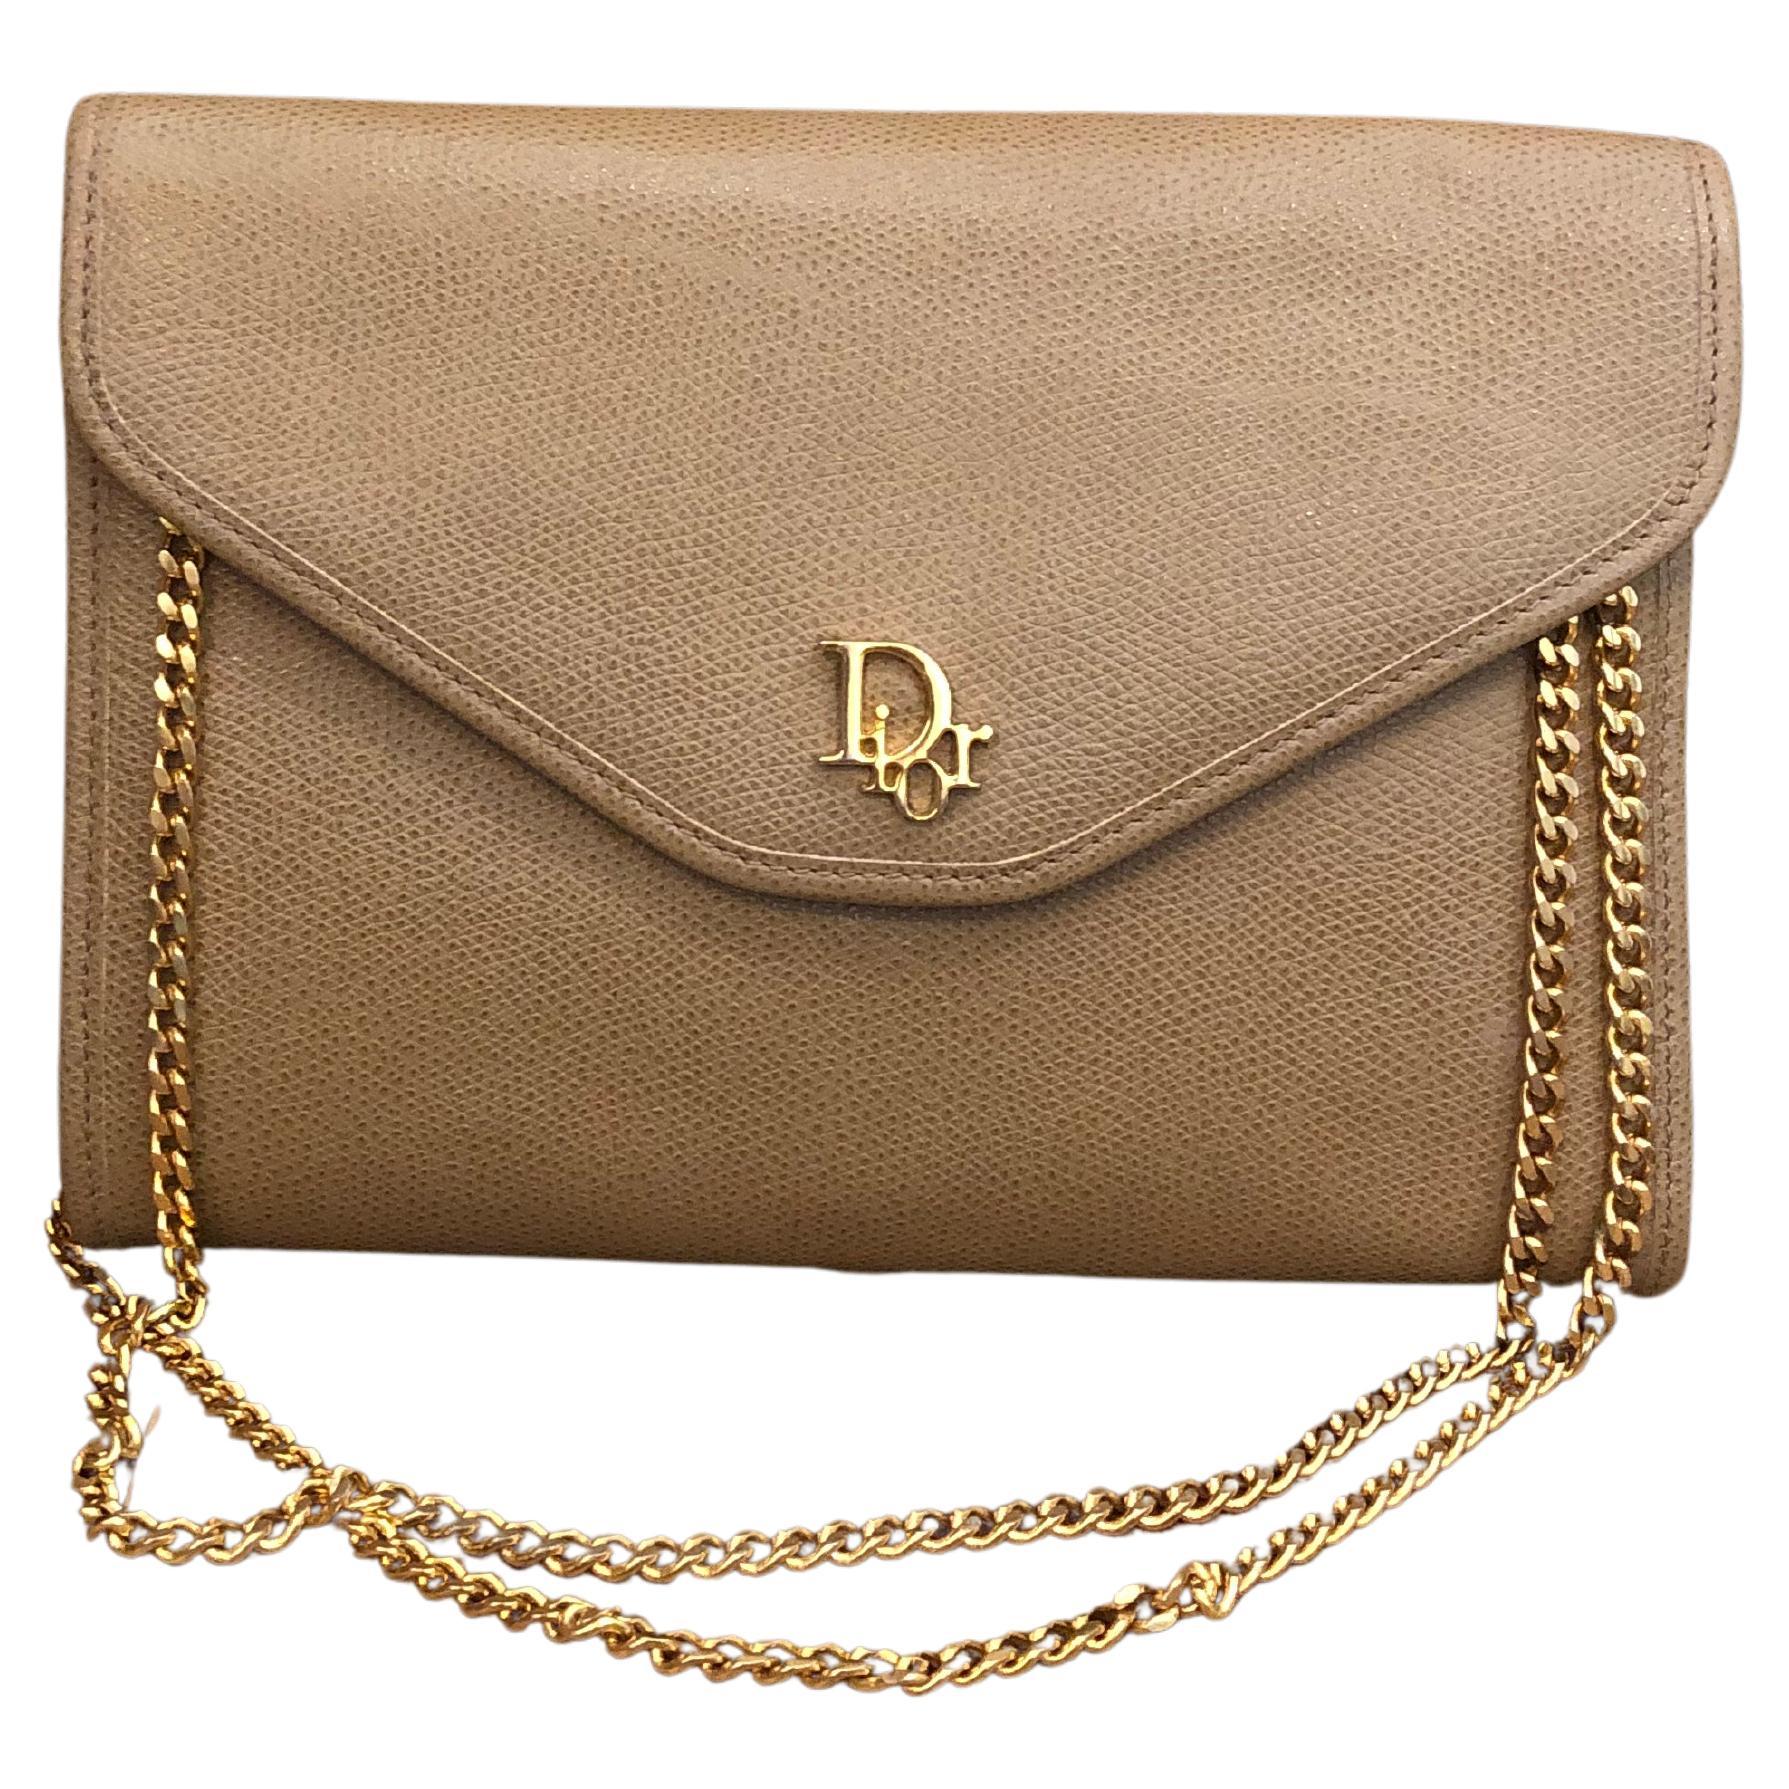 Vintage CHRISTIAN DIOR Beige Leather Chain Bag Small